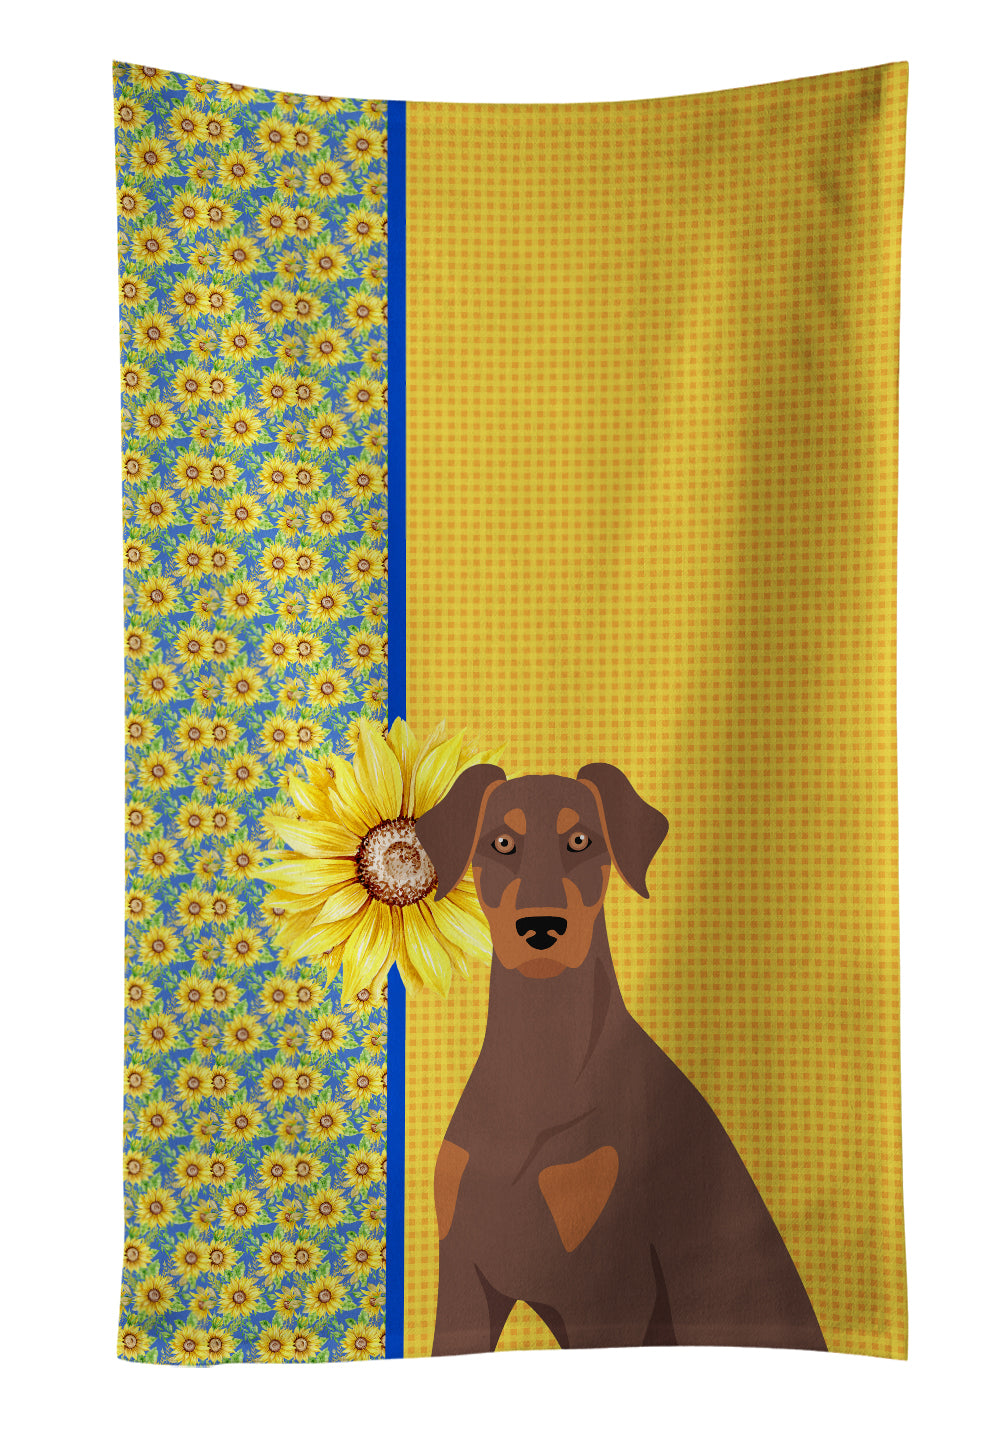 Buy this Summer Sunflowers Natural Ear Red and Tan Doberman Pinscher Kitchen Towel